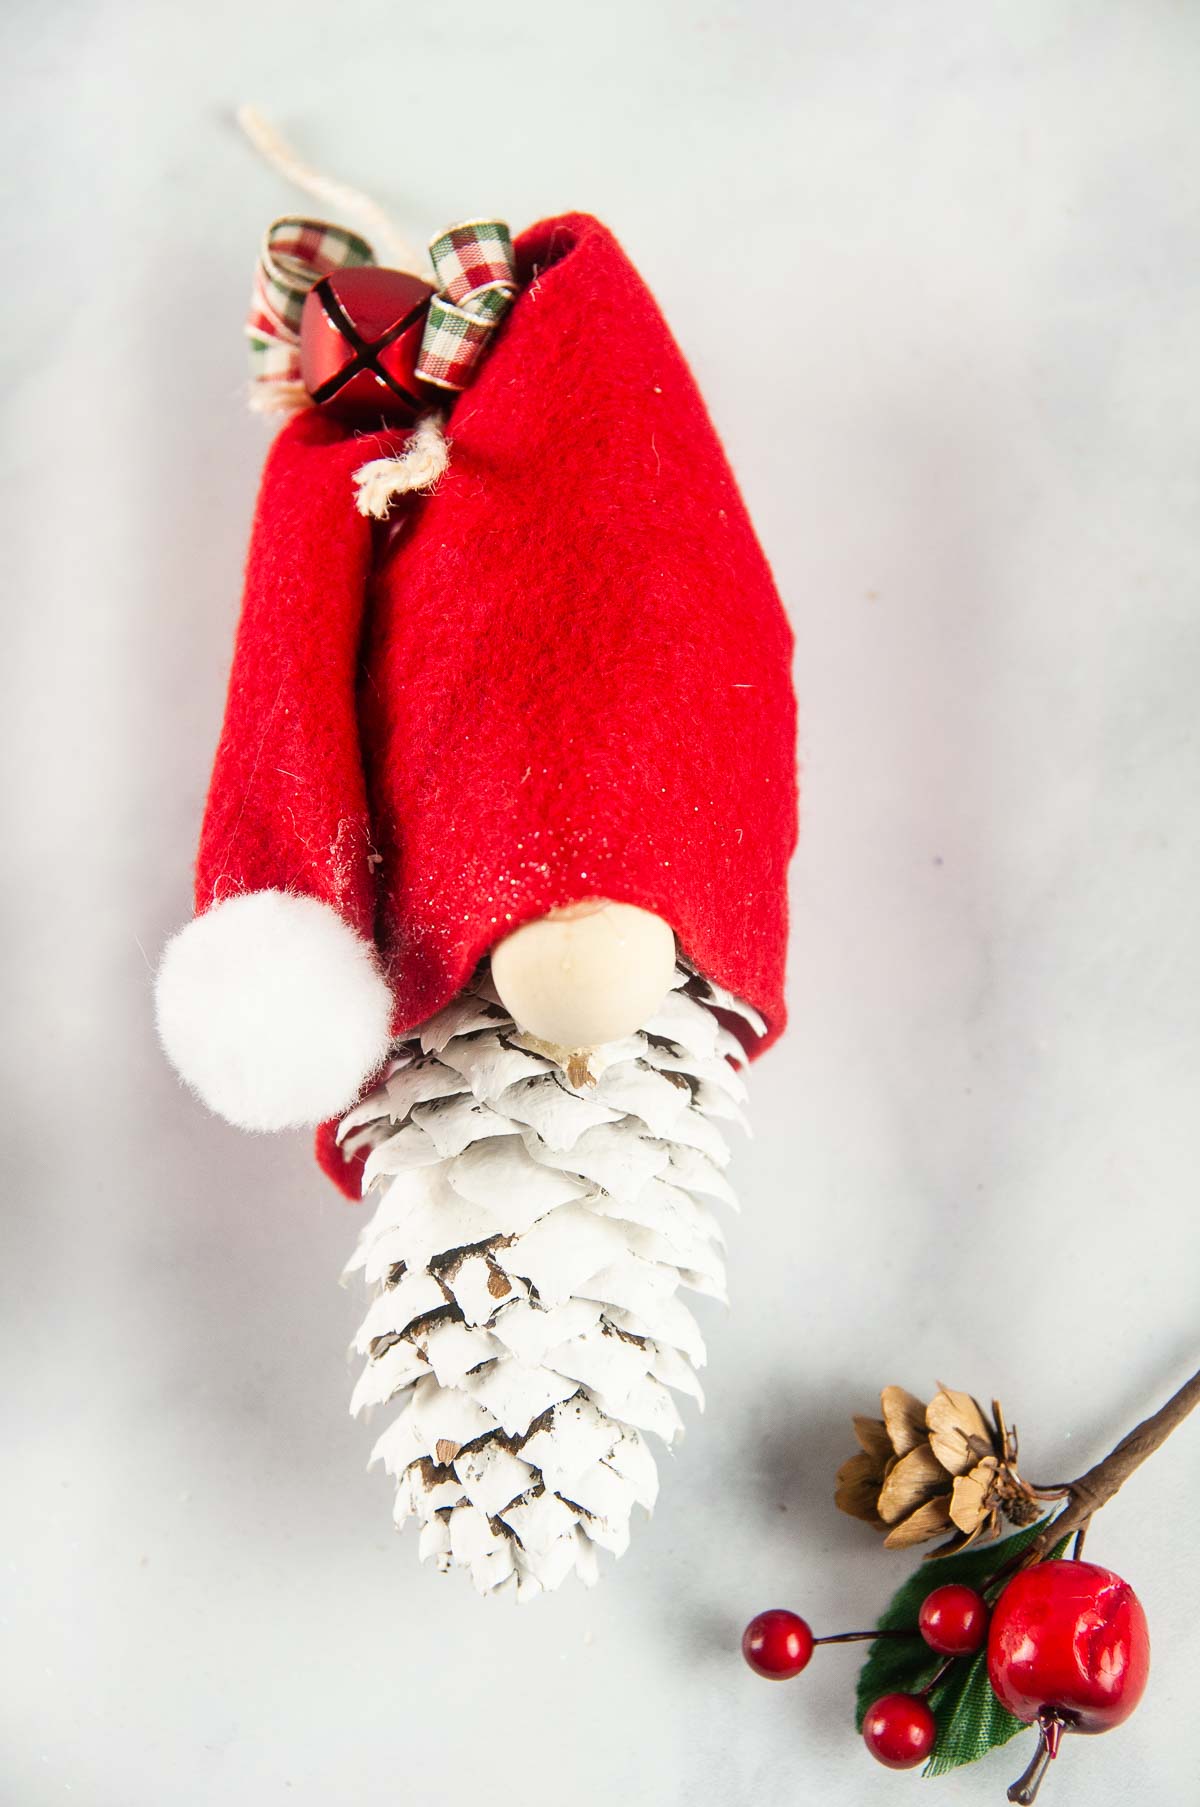 Embelish the gnome hat with a bow or jingle bells.